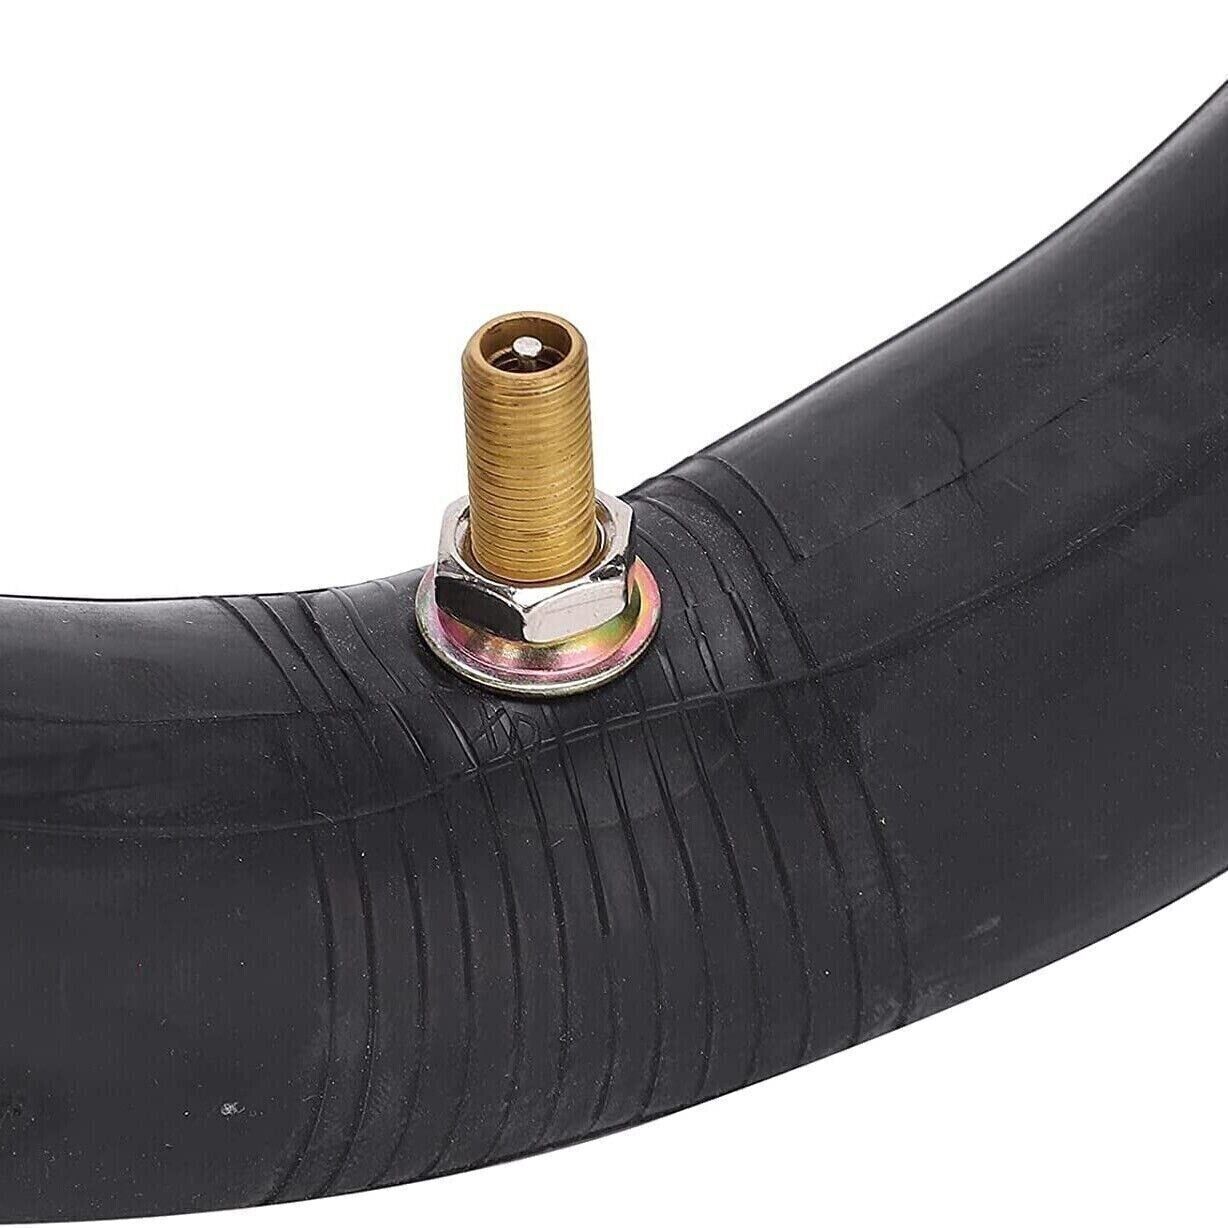 10 X 2.125 Inch Tyre & Tire Inner Tube Set For Self Balancing HoverBoard Scooter